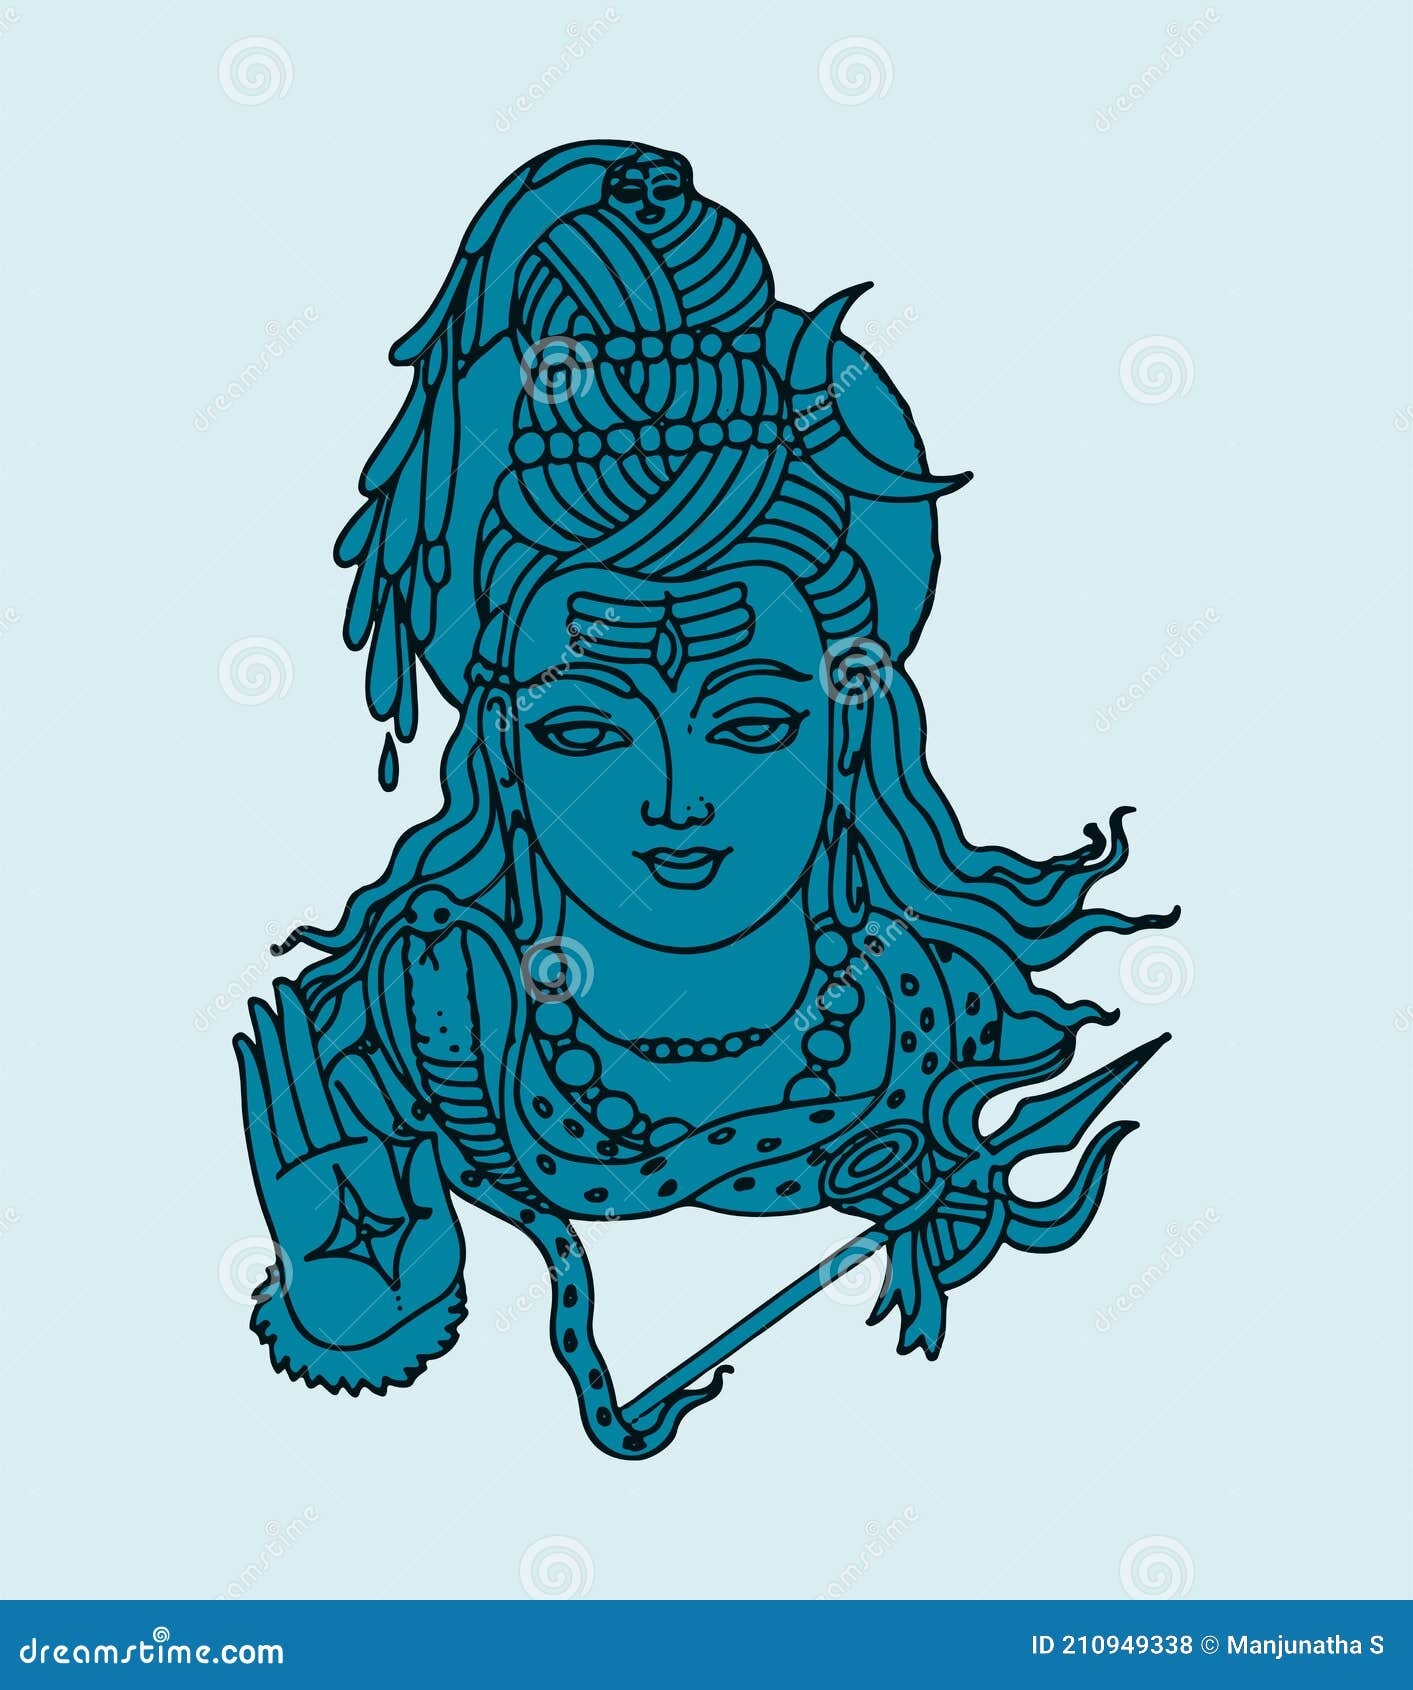 601 Lord Shiva Line Art Images, Stock Photos, 3D objects, & Vectors |  Shutterstock